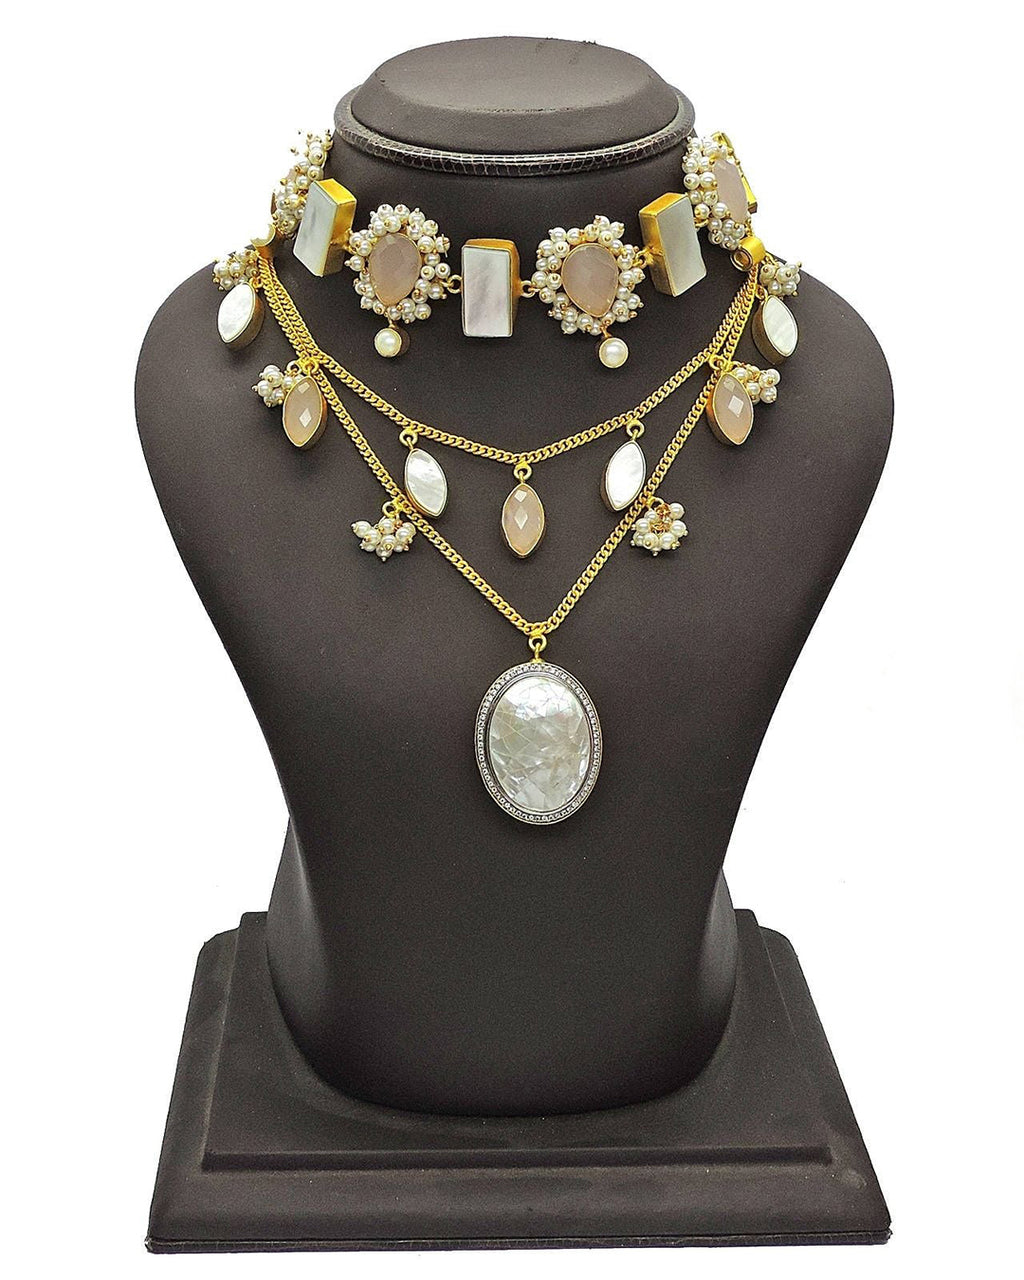 Alessa Necklace - Statement Necklaces - Gold-Plated & Hypoallergenic Jewellery - Made in India - Dubai Jewellery - Dori